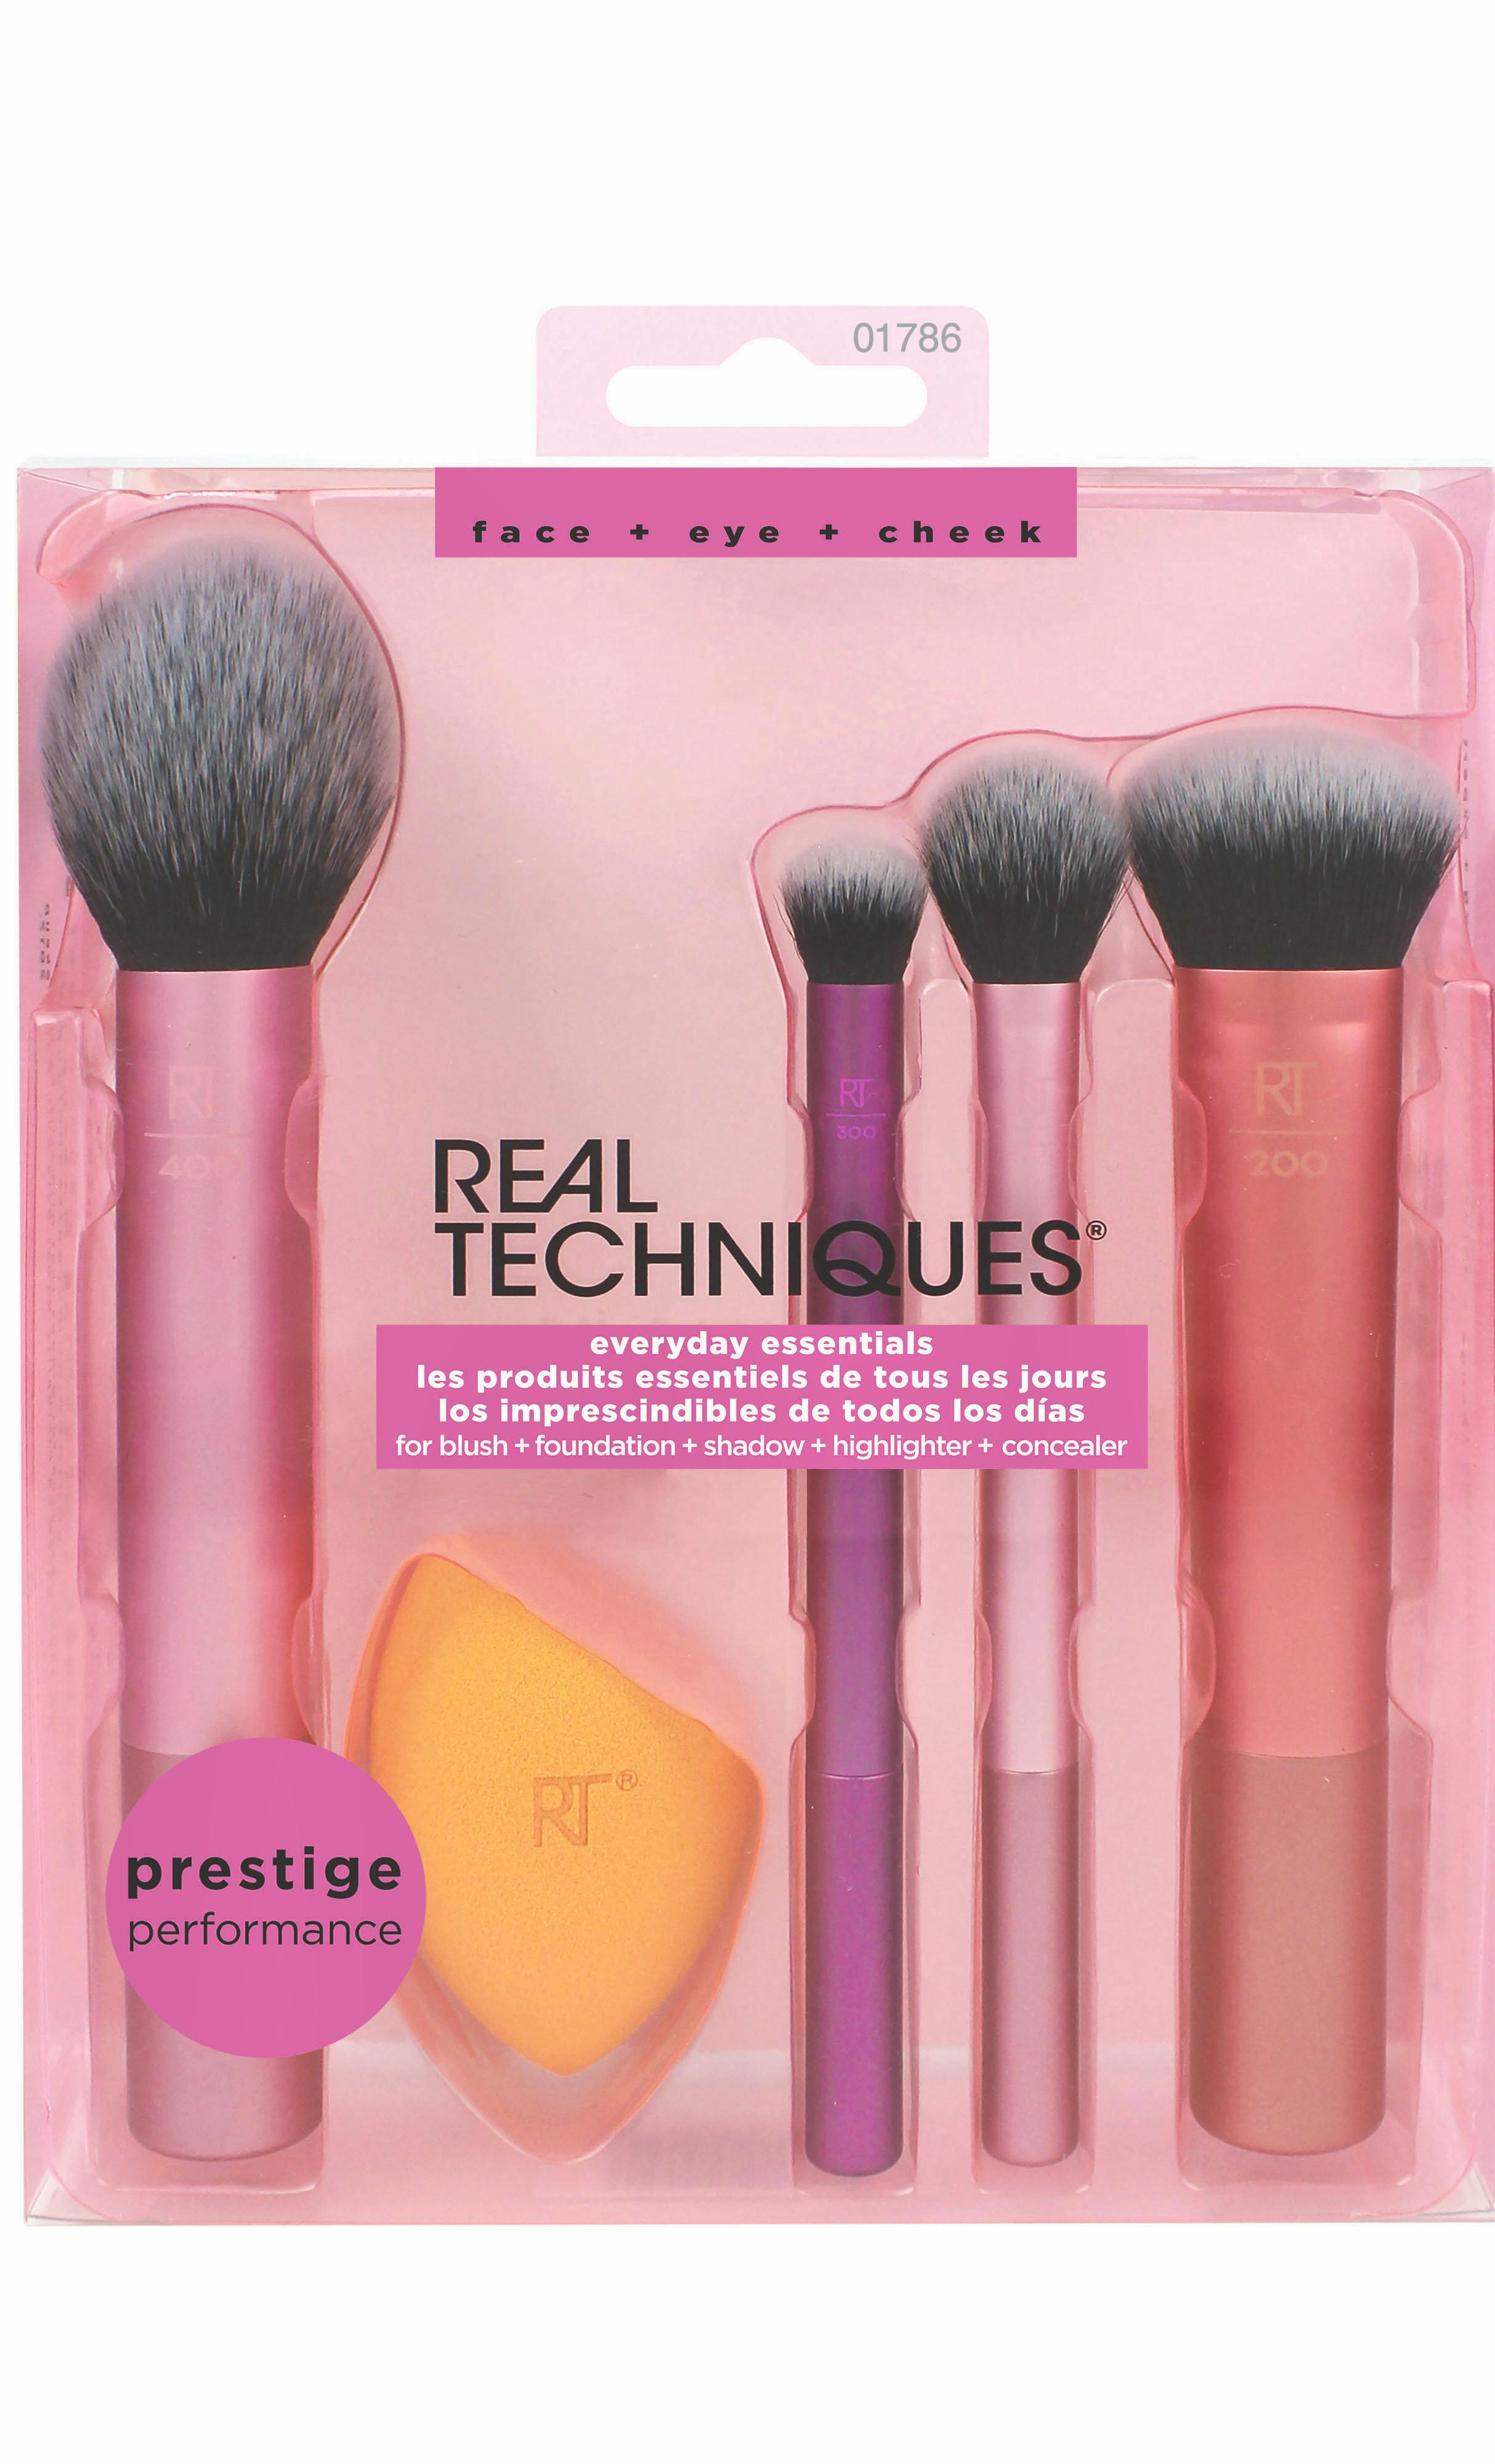 Real Techniques Everyday Essentials Brush Set st - 199.95